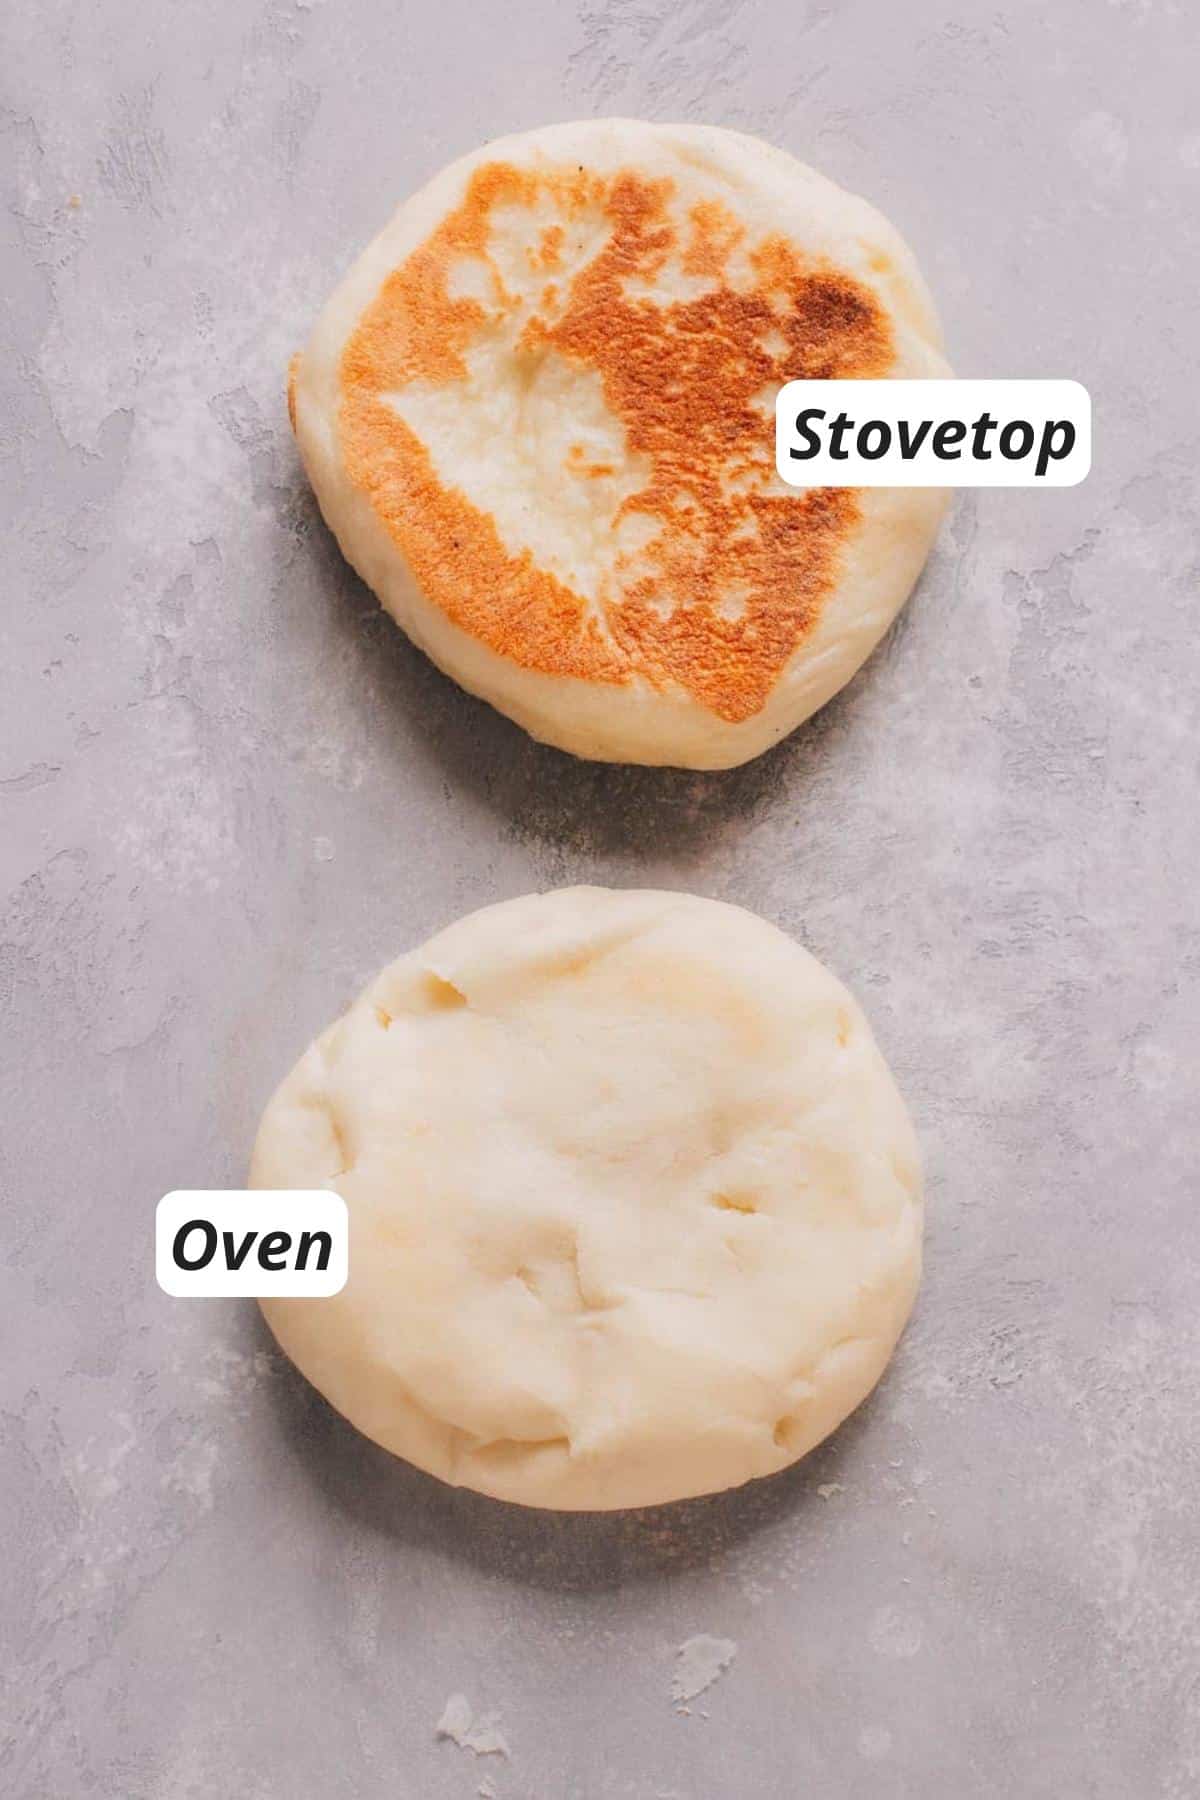 Two Turkish breads are displayed side by side, one cooked on a stovetop with a slightly charred surface, and the other pale one was baked in a steam oven.